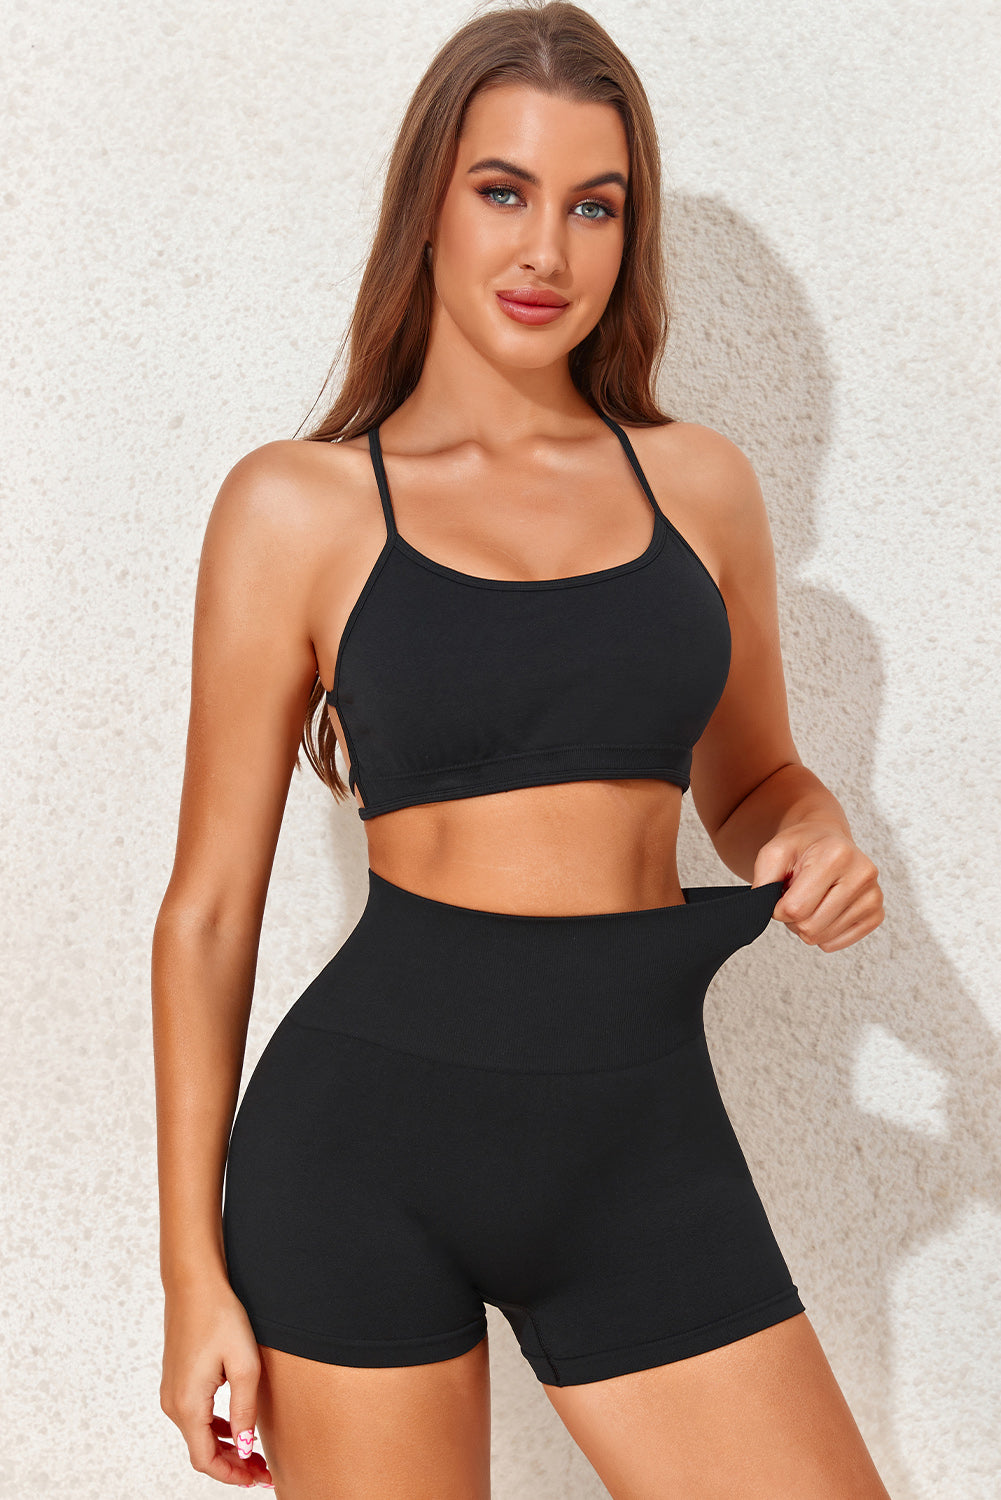 Black Strappy Yoga Bra and Crunched Shorts Set